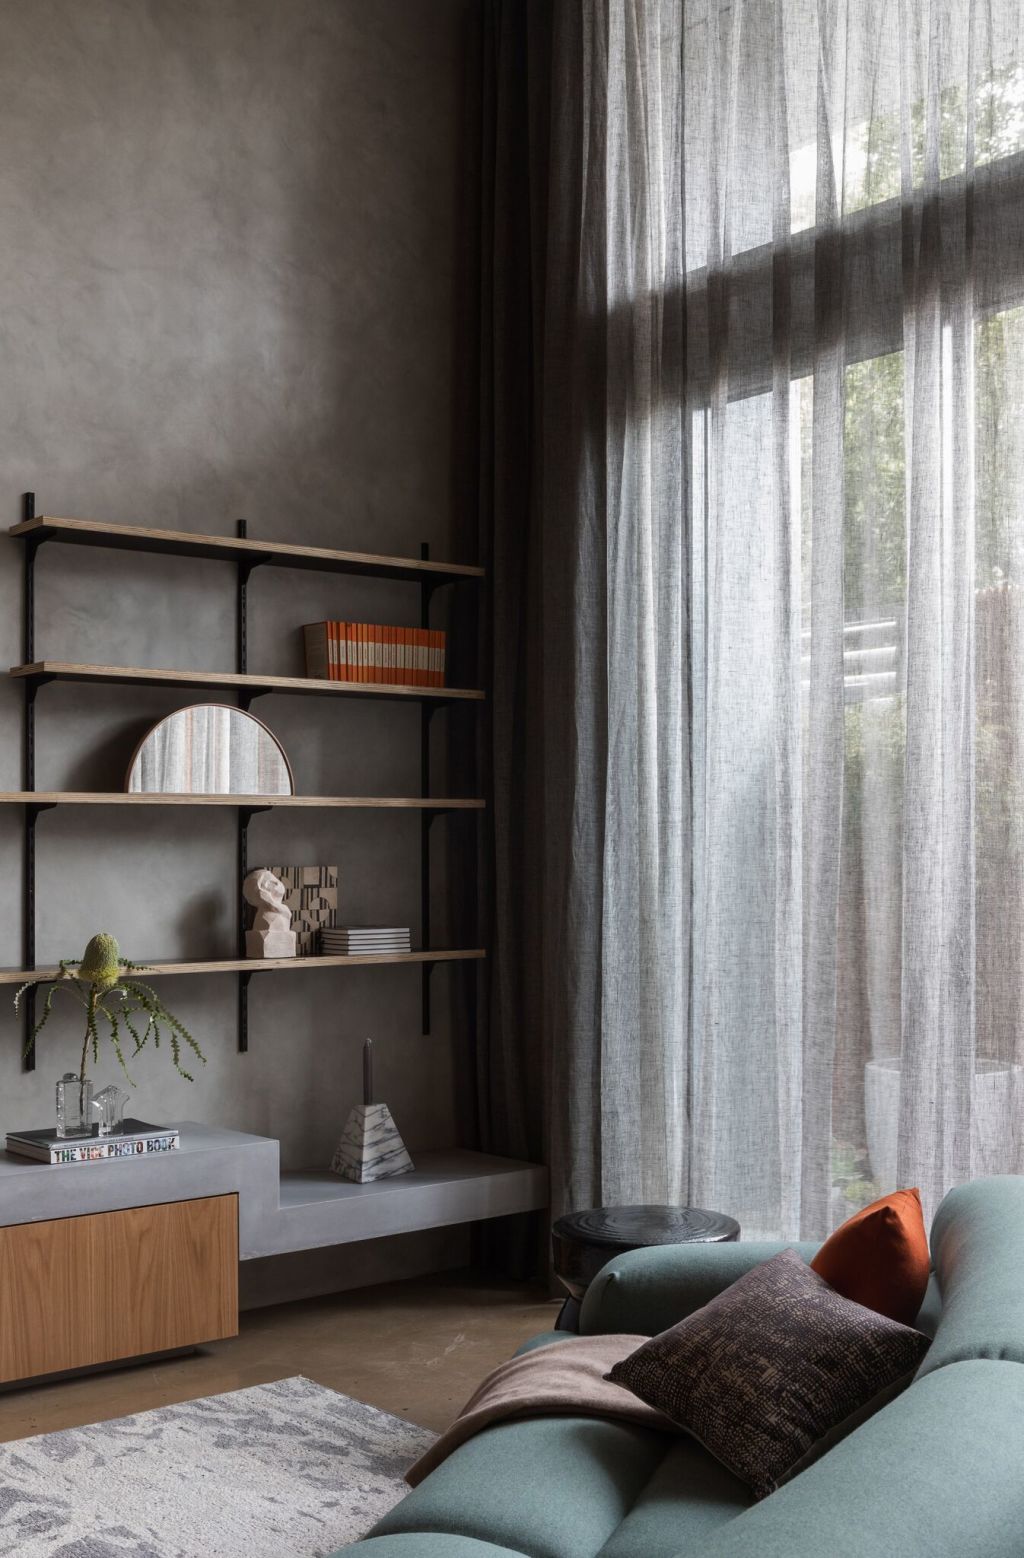 Concrete and curves highlight the contrasts in this sophisticated studio. Photo: Katherine Lu